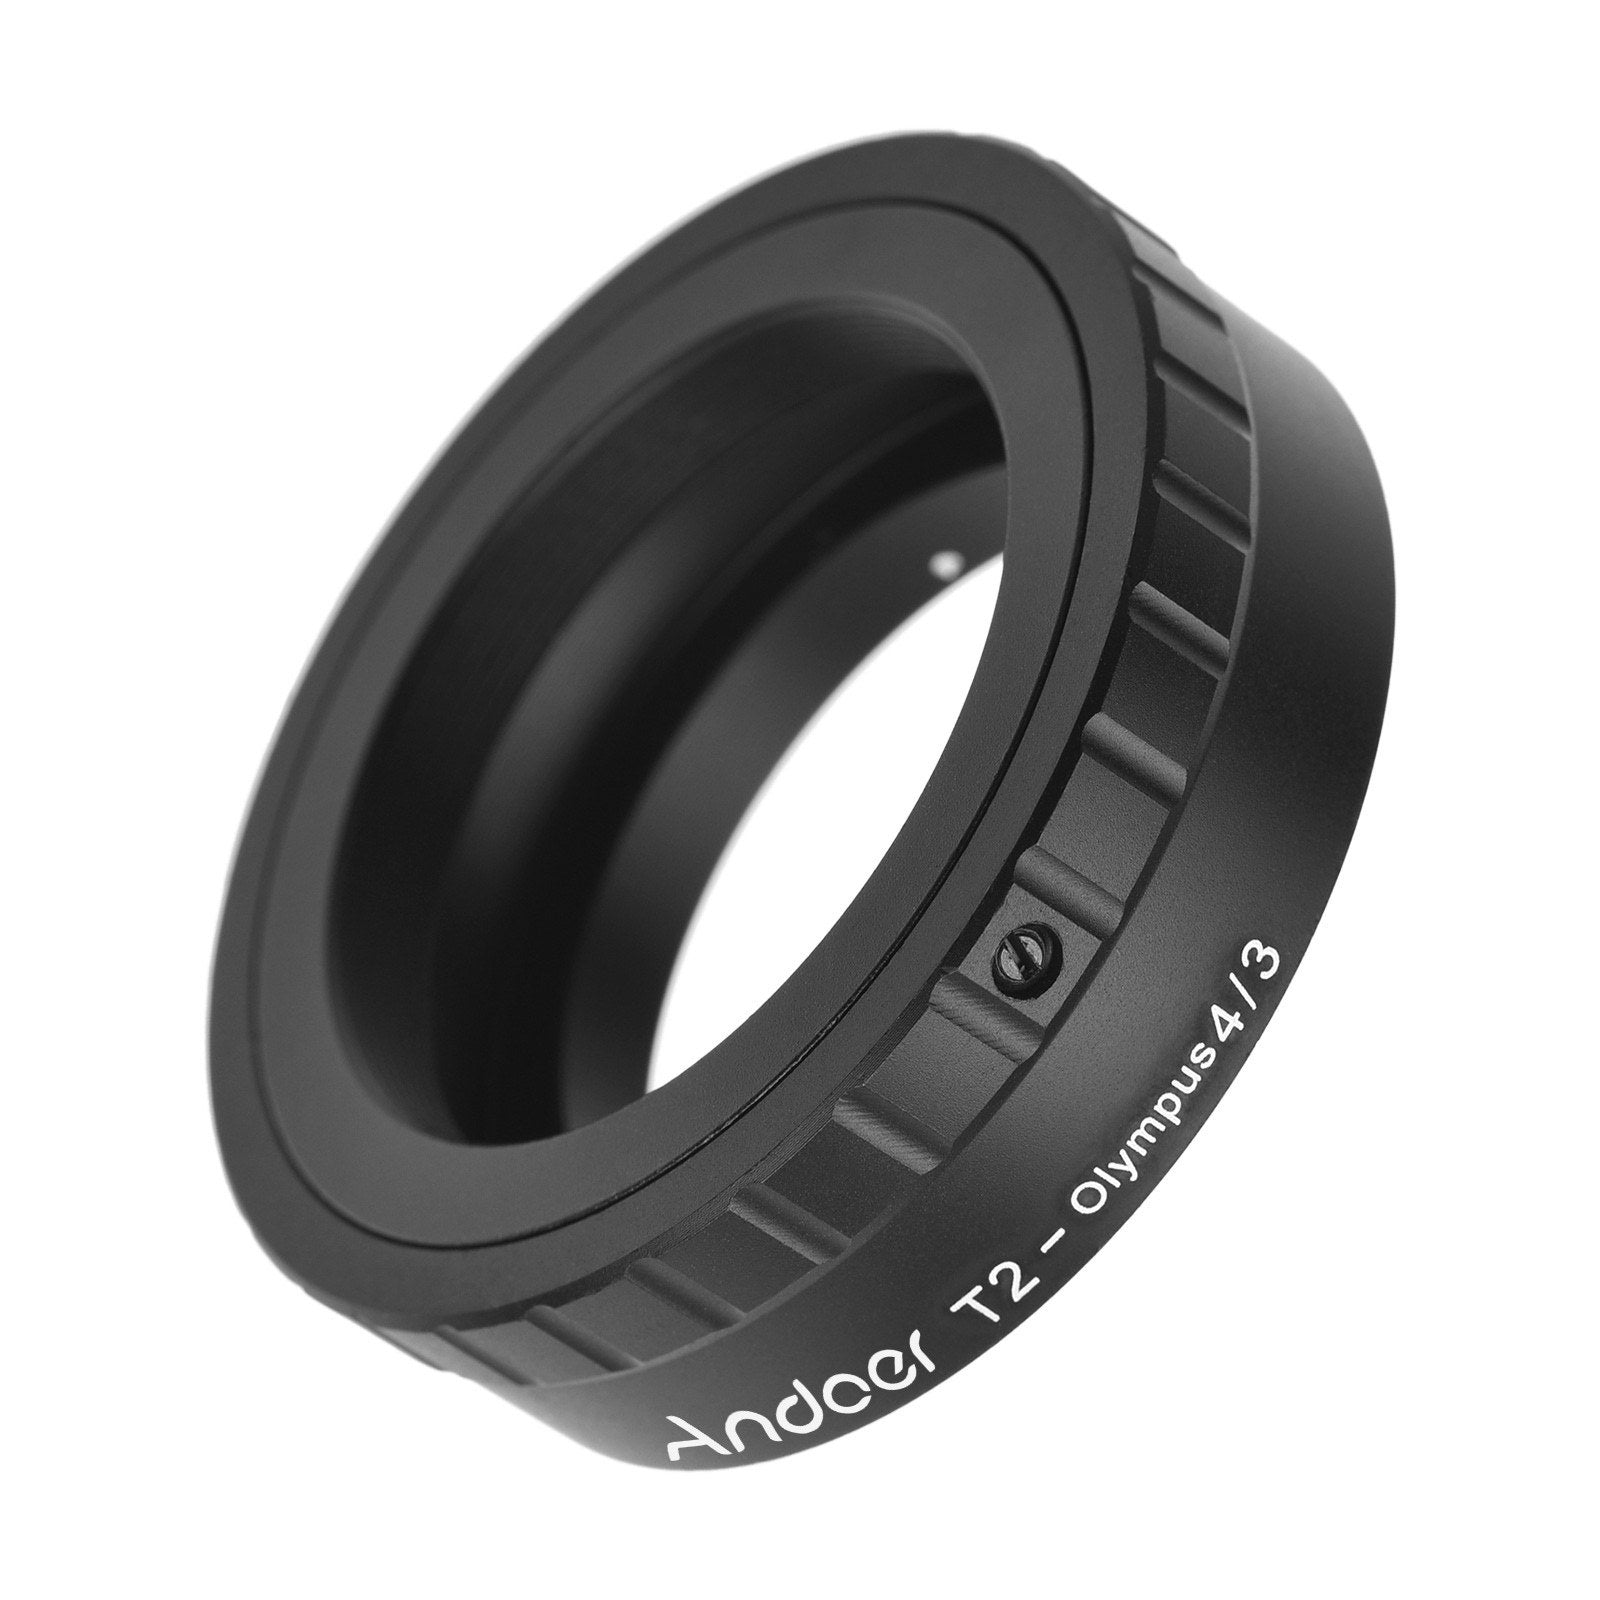 Andoer T/T2 Mount Lens Adapter Replacement Metal Lens Mount Adapter Ring for Olympus E-1/E-3/E-10/E-20/E-30/E-300/E-330/E-400/E-410/E-420/E-450/E-500/E-510/E-520/E-600/E-620/E-100 RS Micro 4/3 Mount Cameras